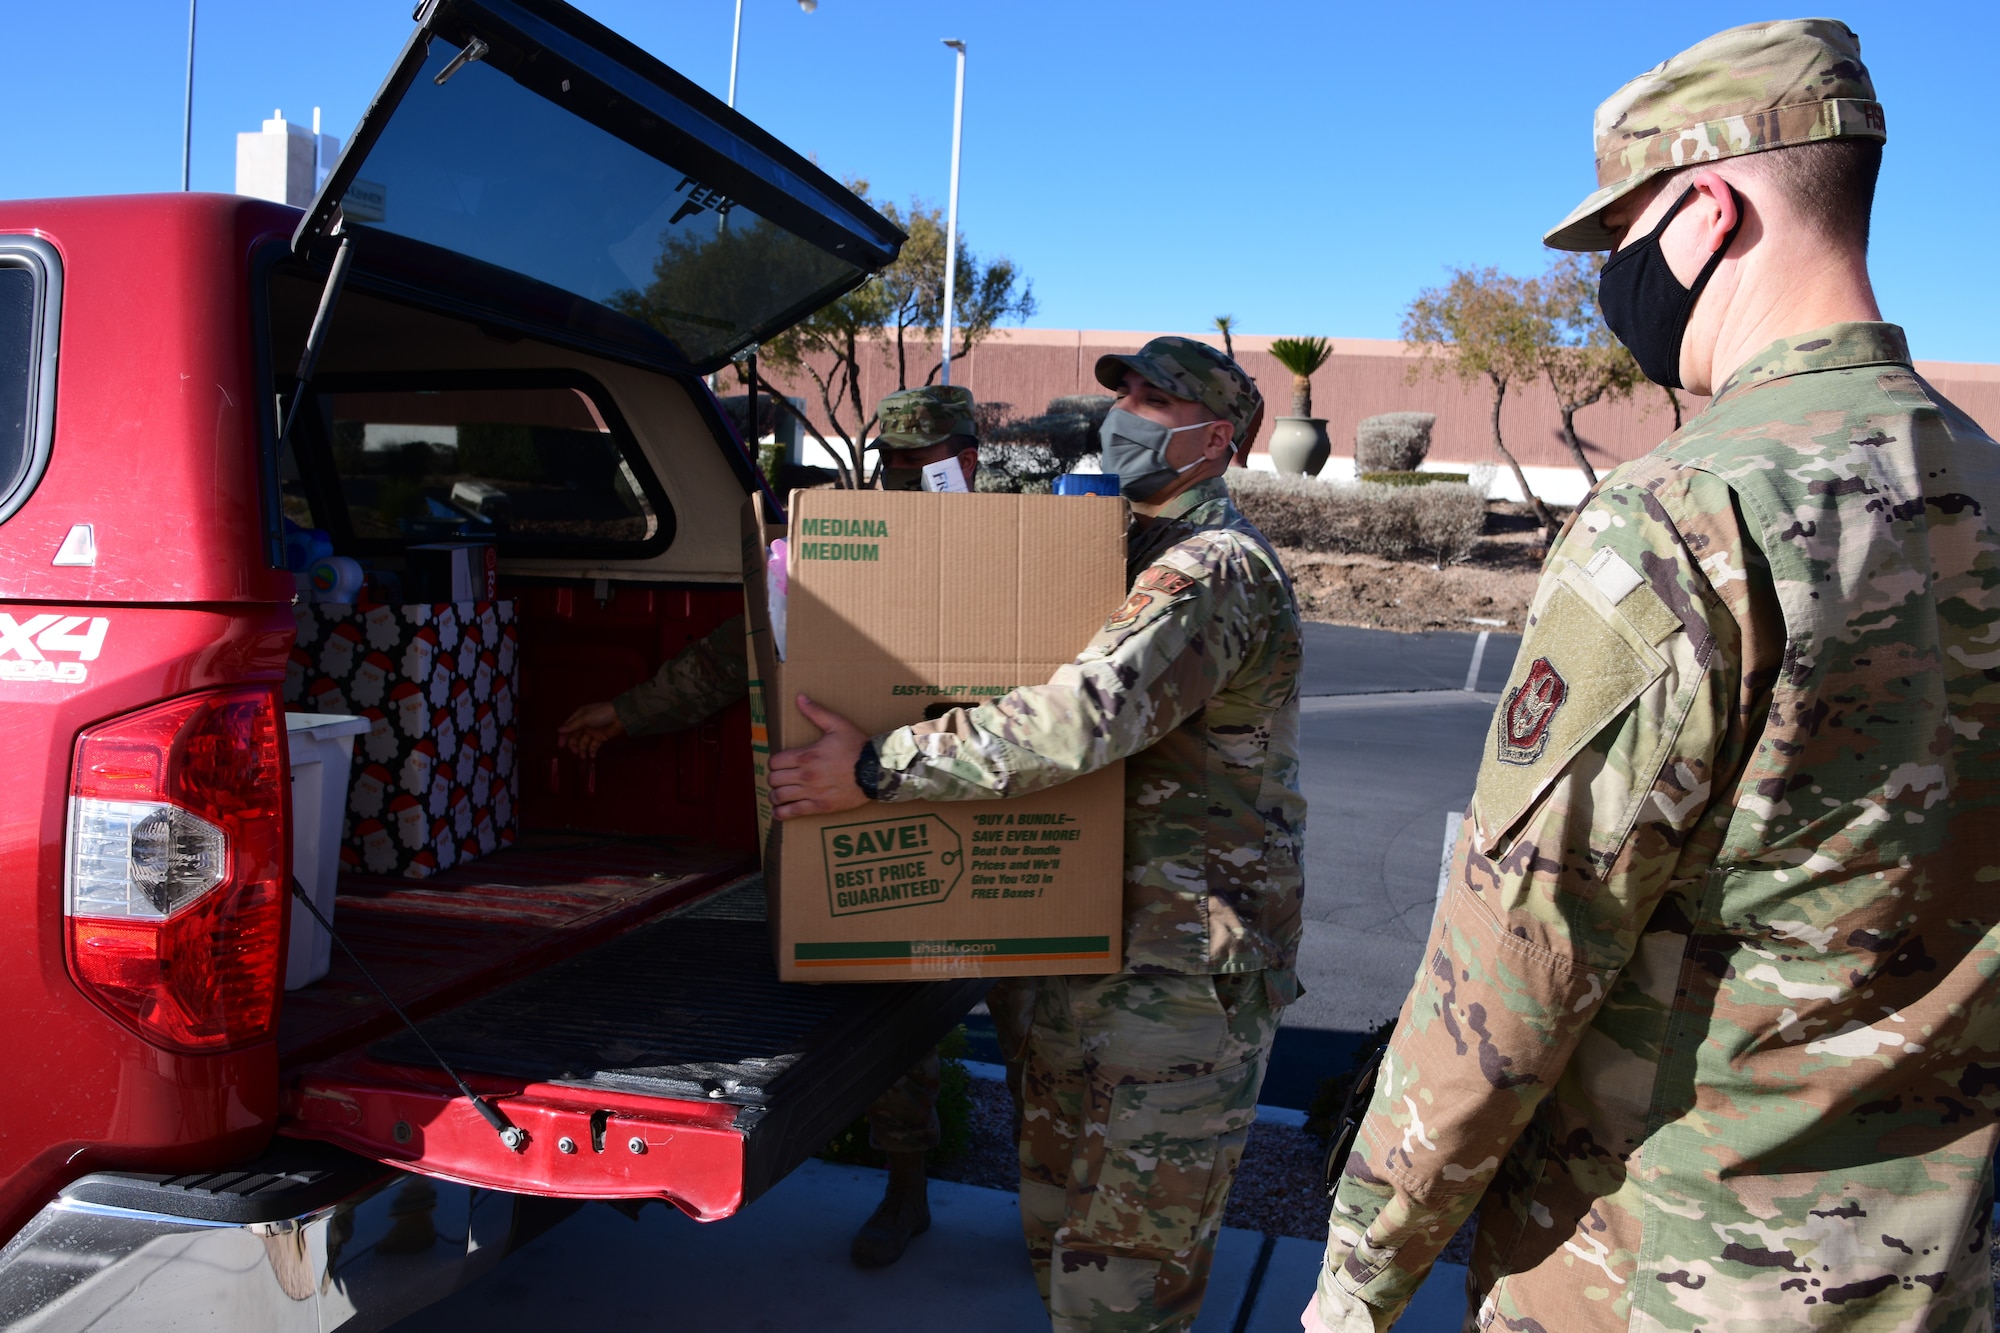 926th Wing volunteers, Master Sgt. Caleb Fishell, Tech. Sgt. Jordan Gonzales and Staff Sgt. Miguel Acosta, carry toy donations into a local nonprofit, Dec. 14, in Las Vegas, Nev. (U.S. Air Force Photo by Staff Sgt. Paige Yenke)